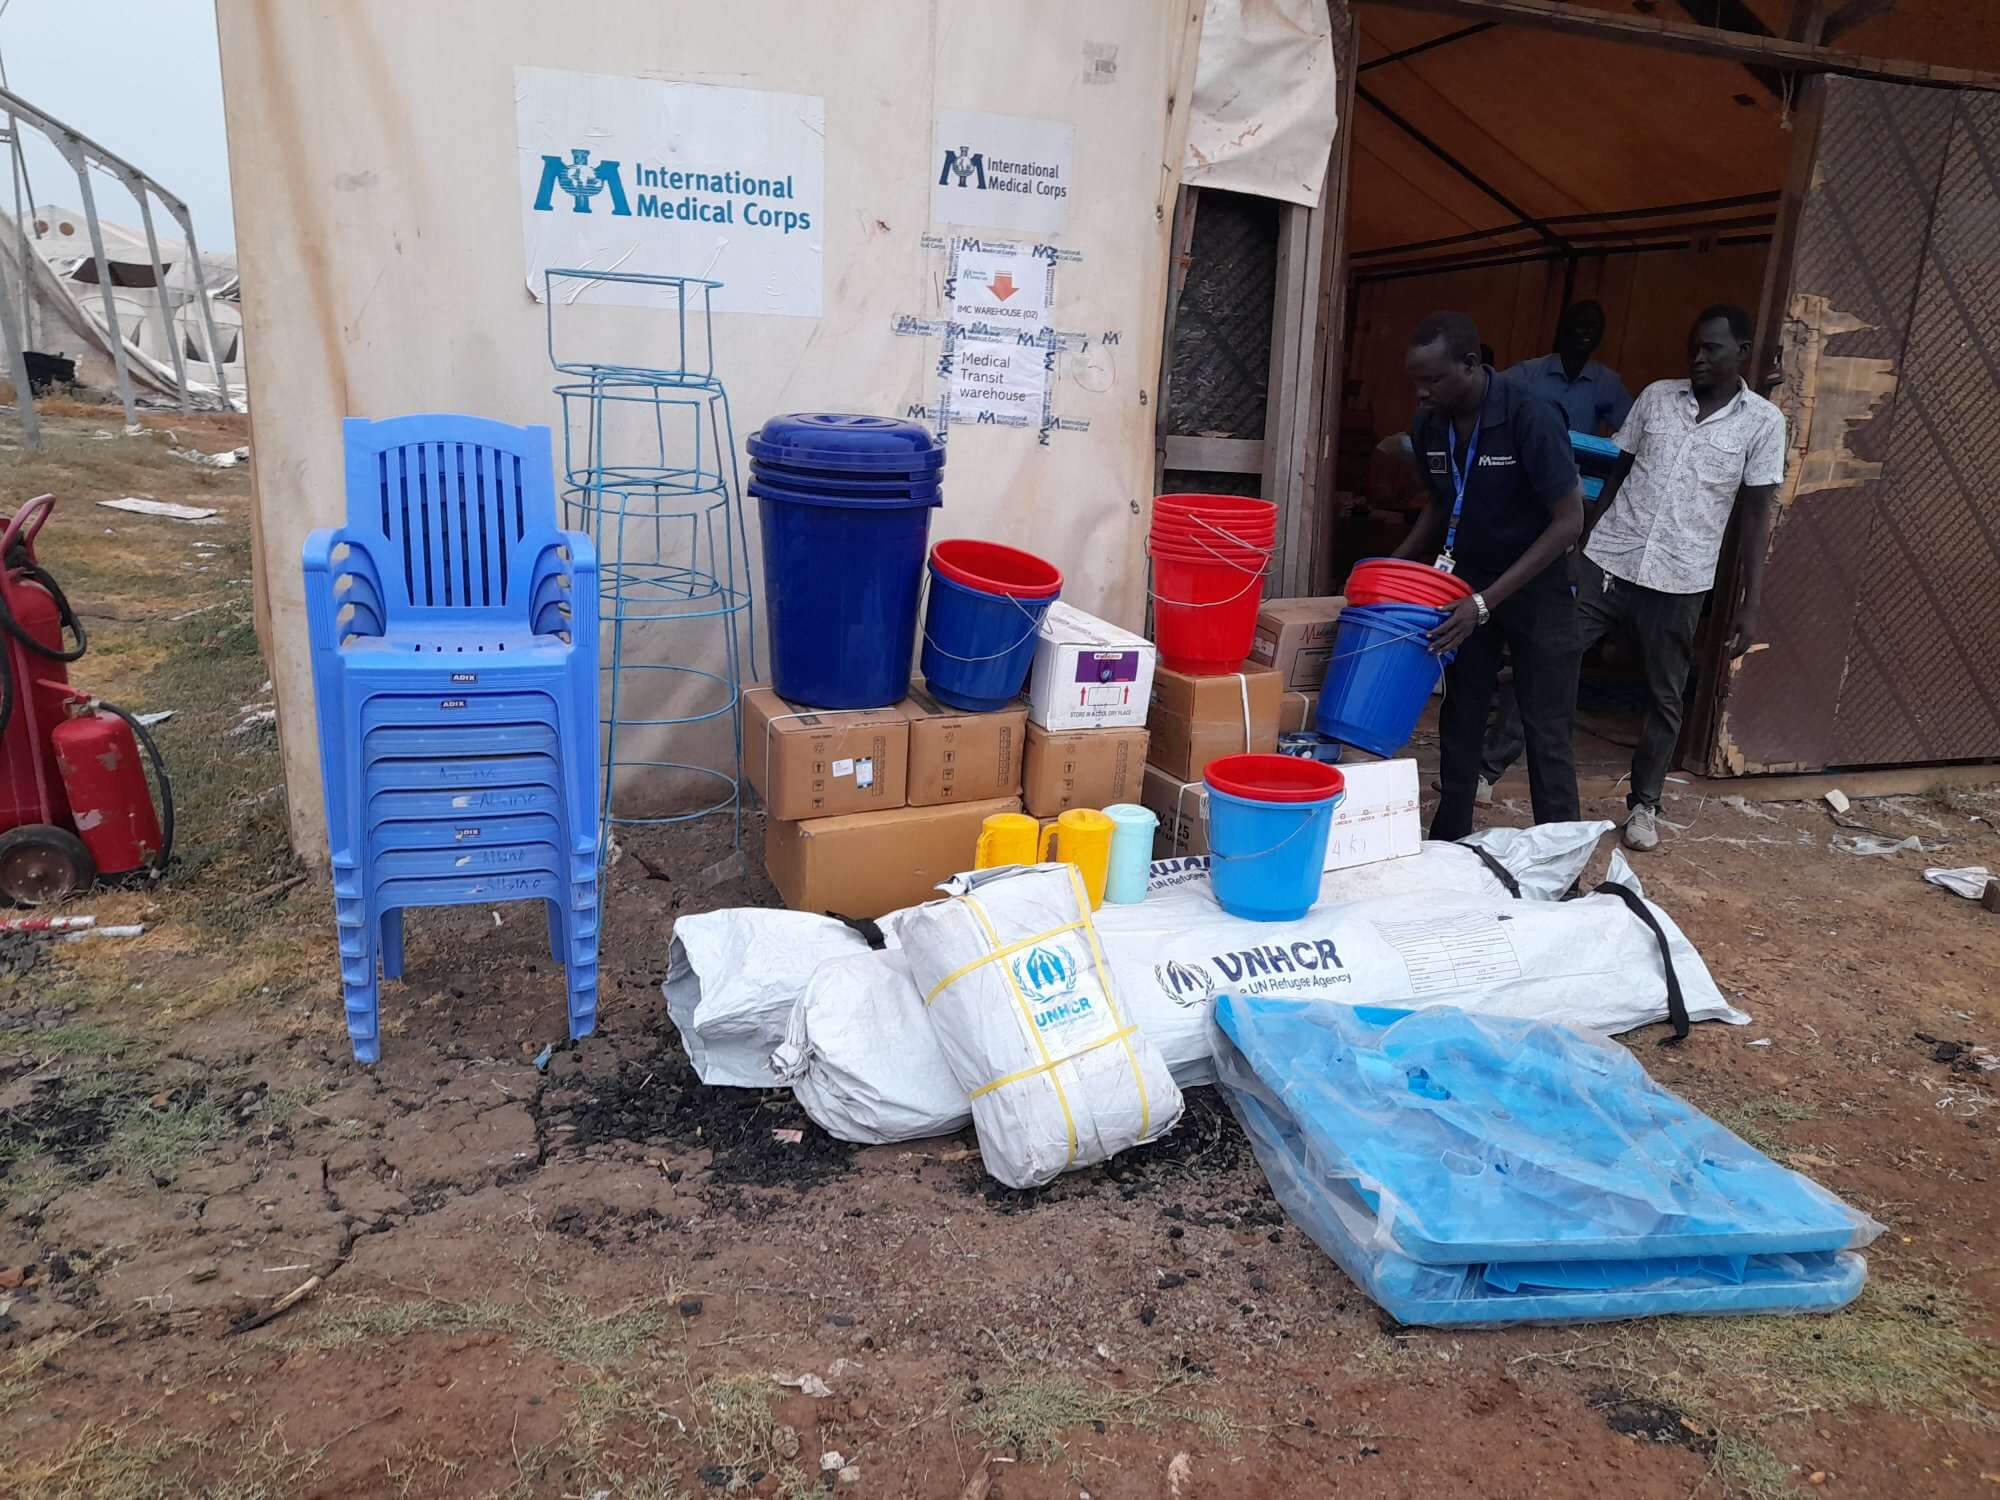 In April, our South Sudan team received non-food items— including tents and plastic sheets—from UNHCR in Malakal, and mobilized medical supplies and consumables from existing projects to help Sudanese refugees in the border town of Renk, South Sudan.